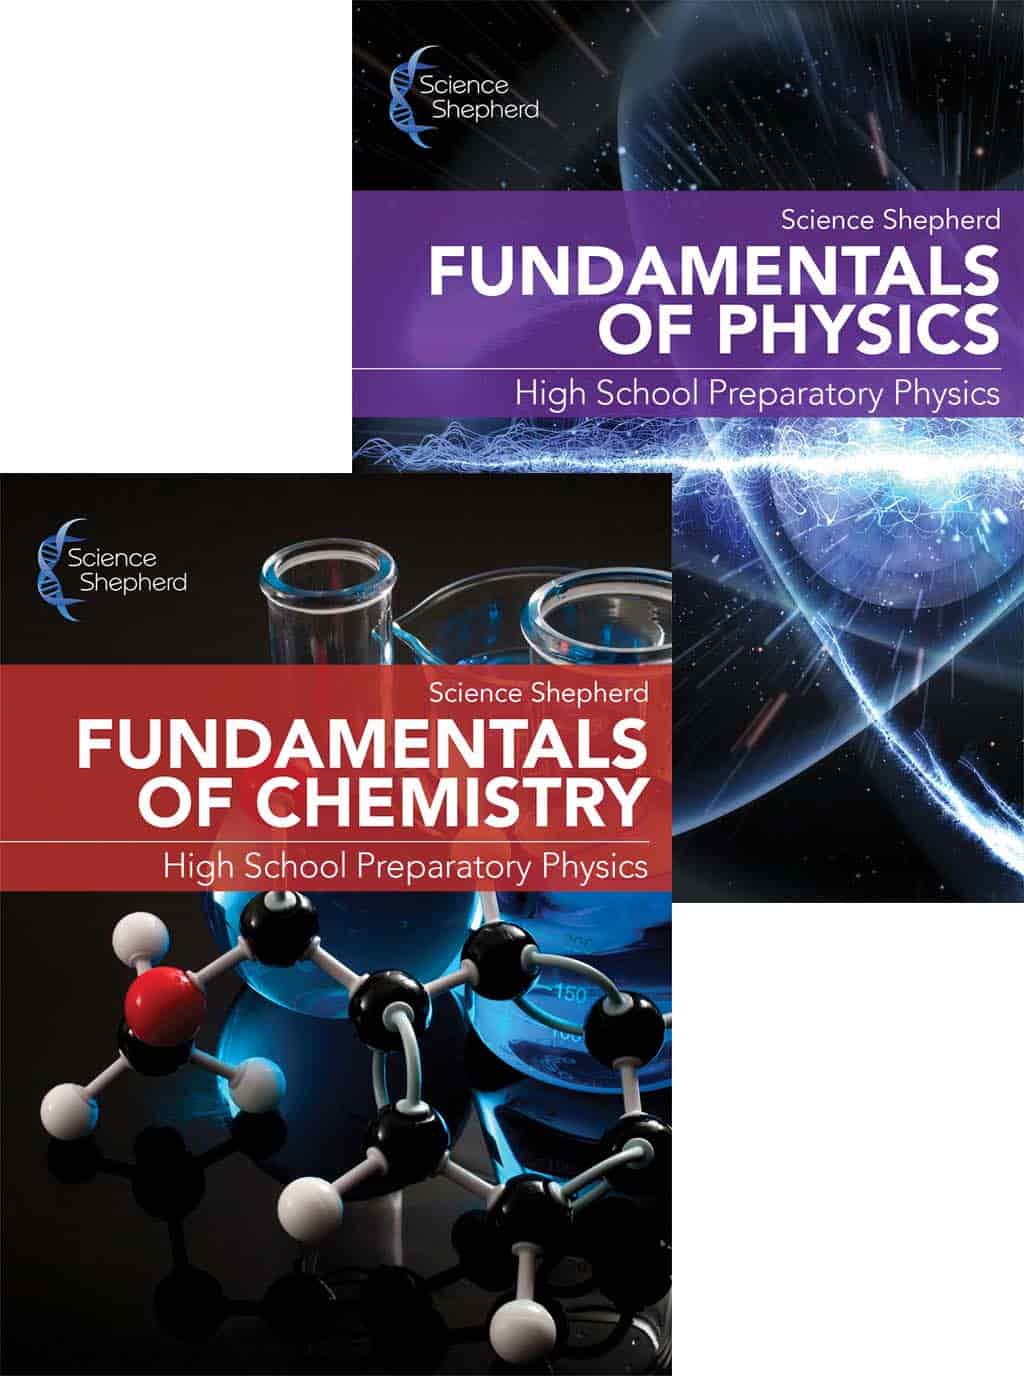 Homeschool science middle school chemistry and physics textbooks bundle cover